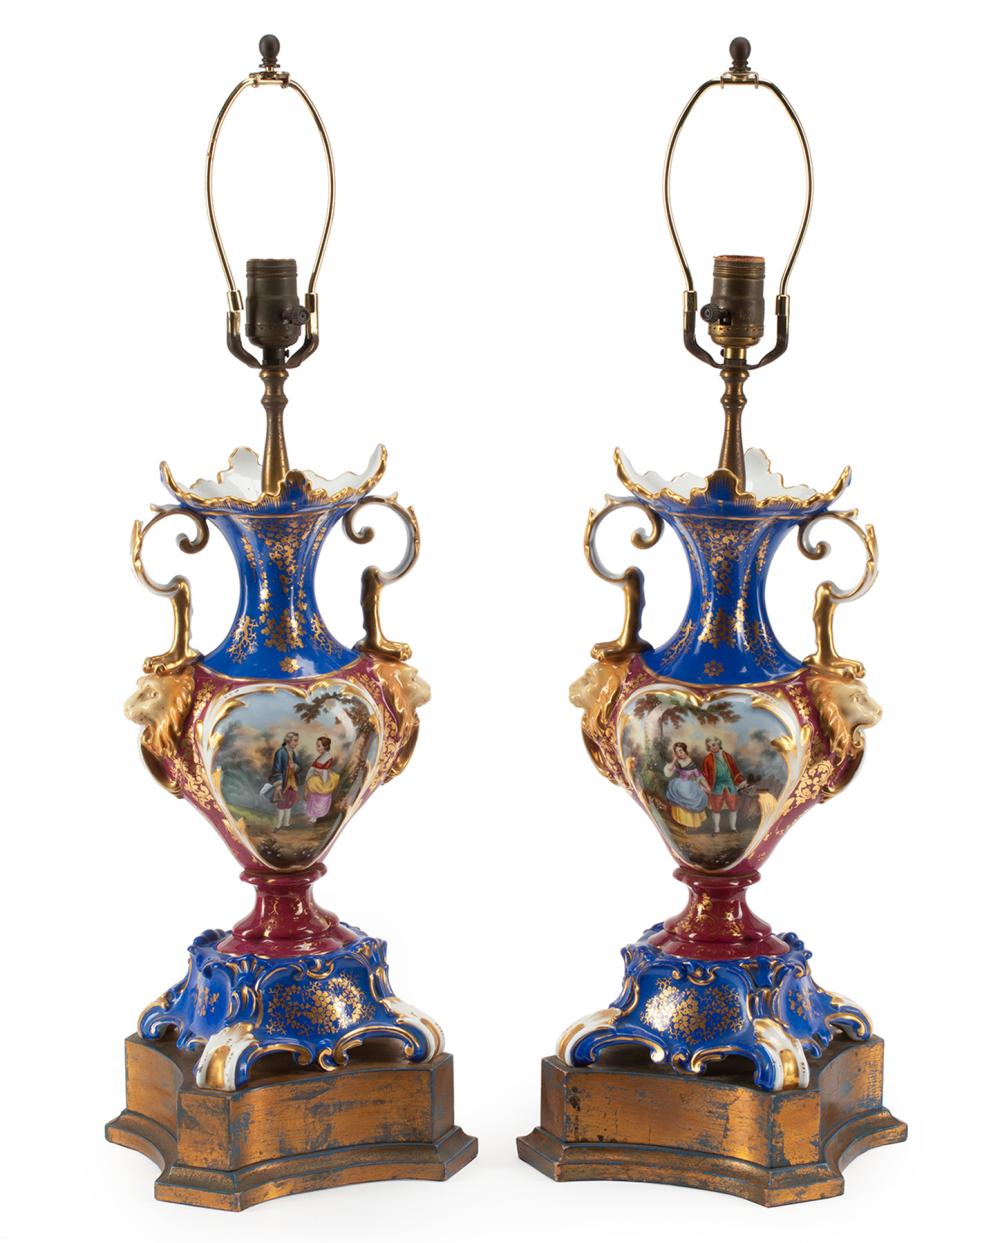 PAIR OF VICTORIAN POLYCHROME PORCELAIN